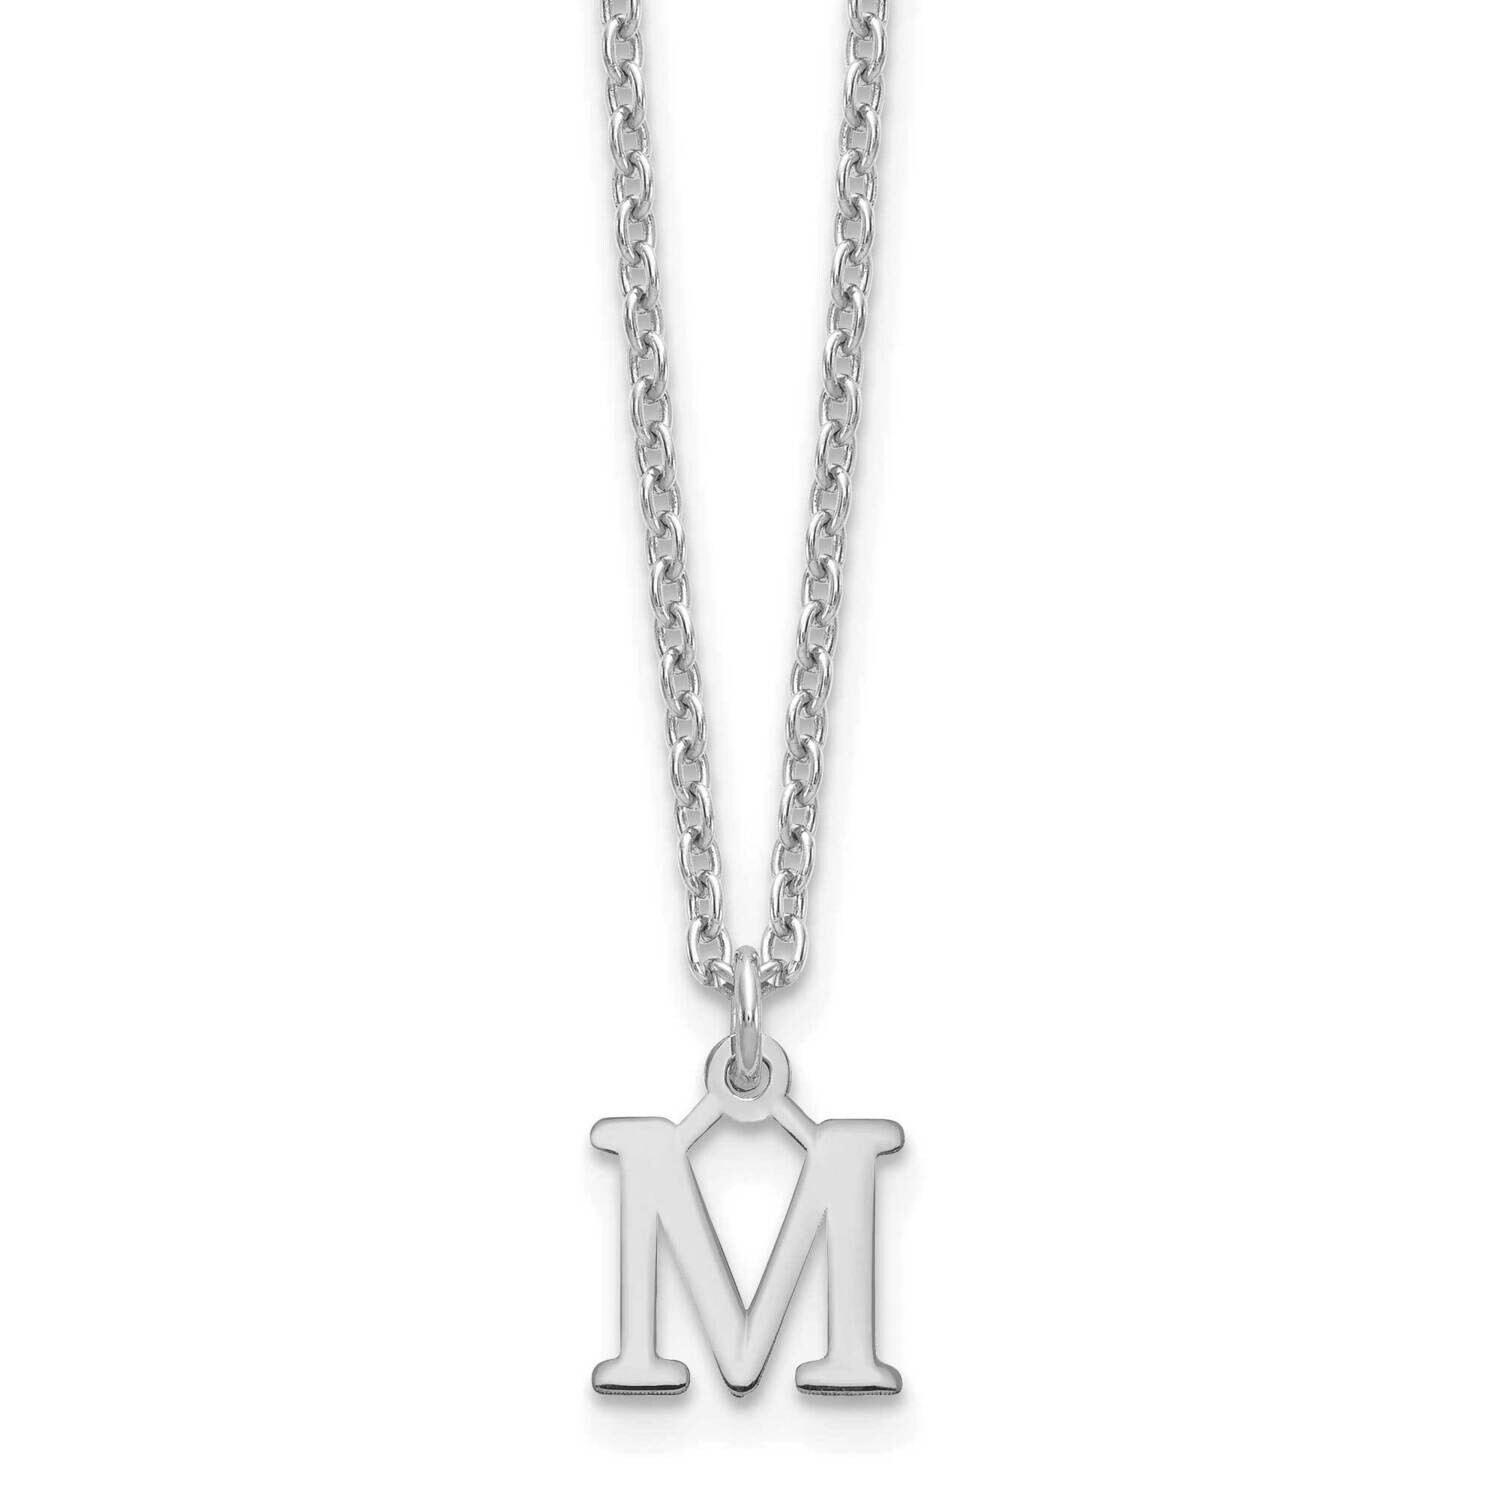 Cutout Letter M Initial Necklace Sterling Silver Rhodium-Plated XNA727SS/M